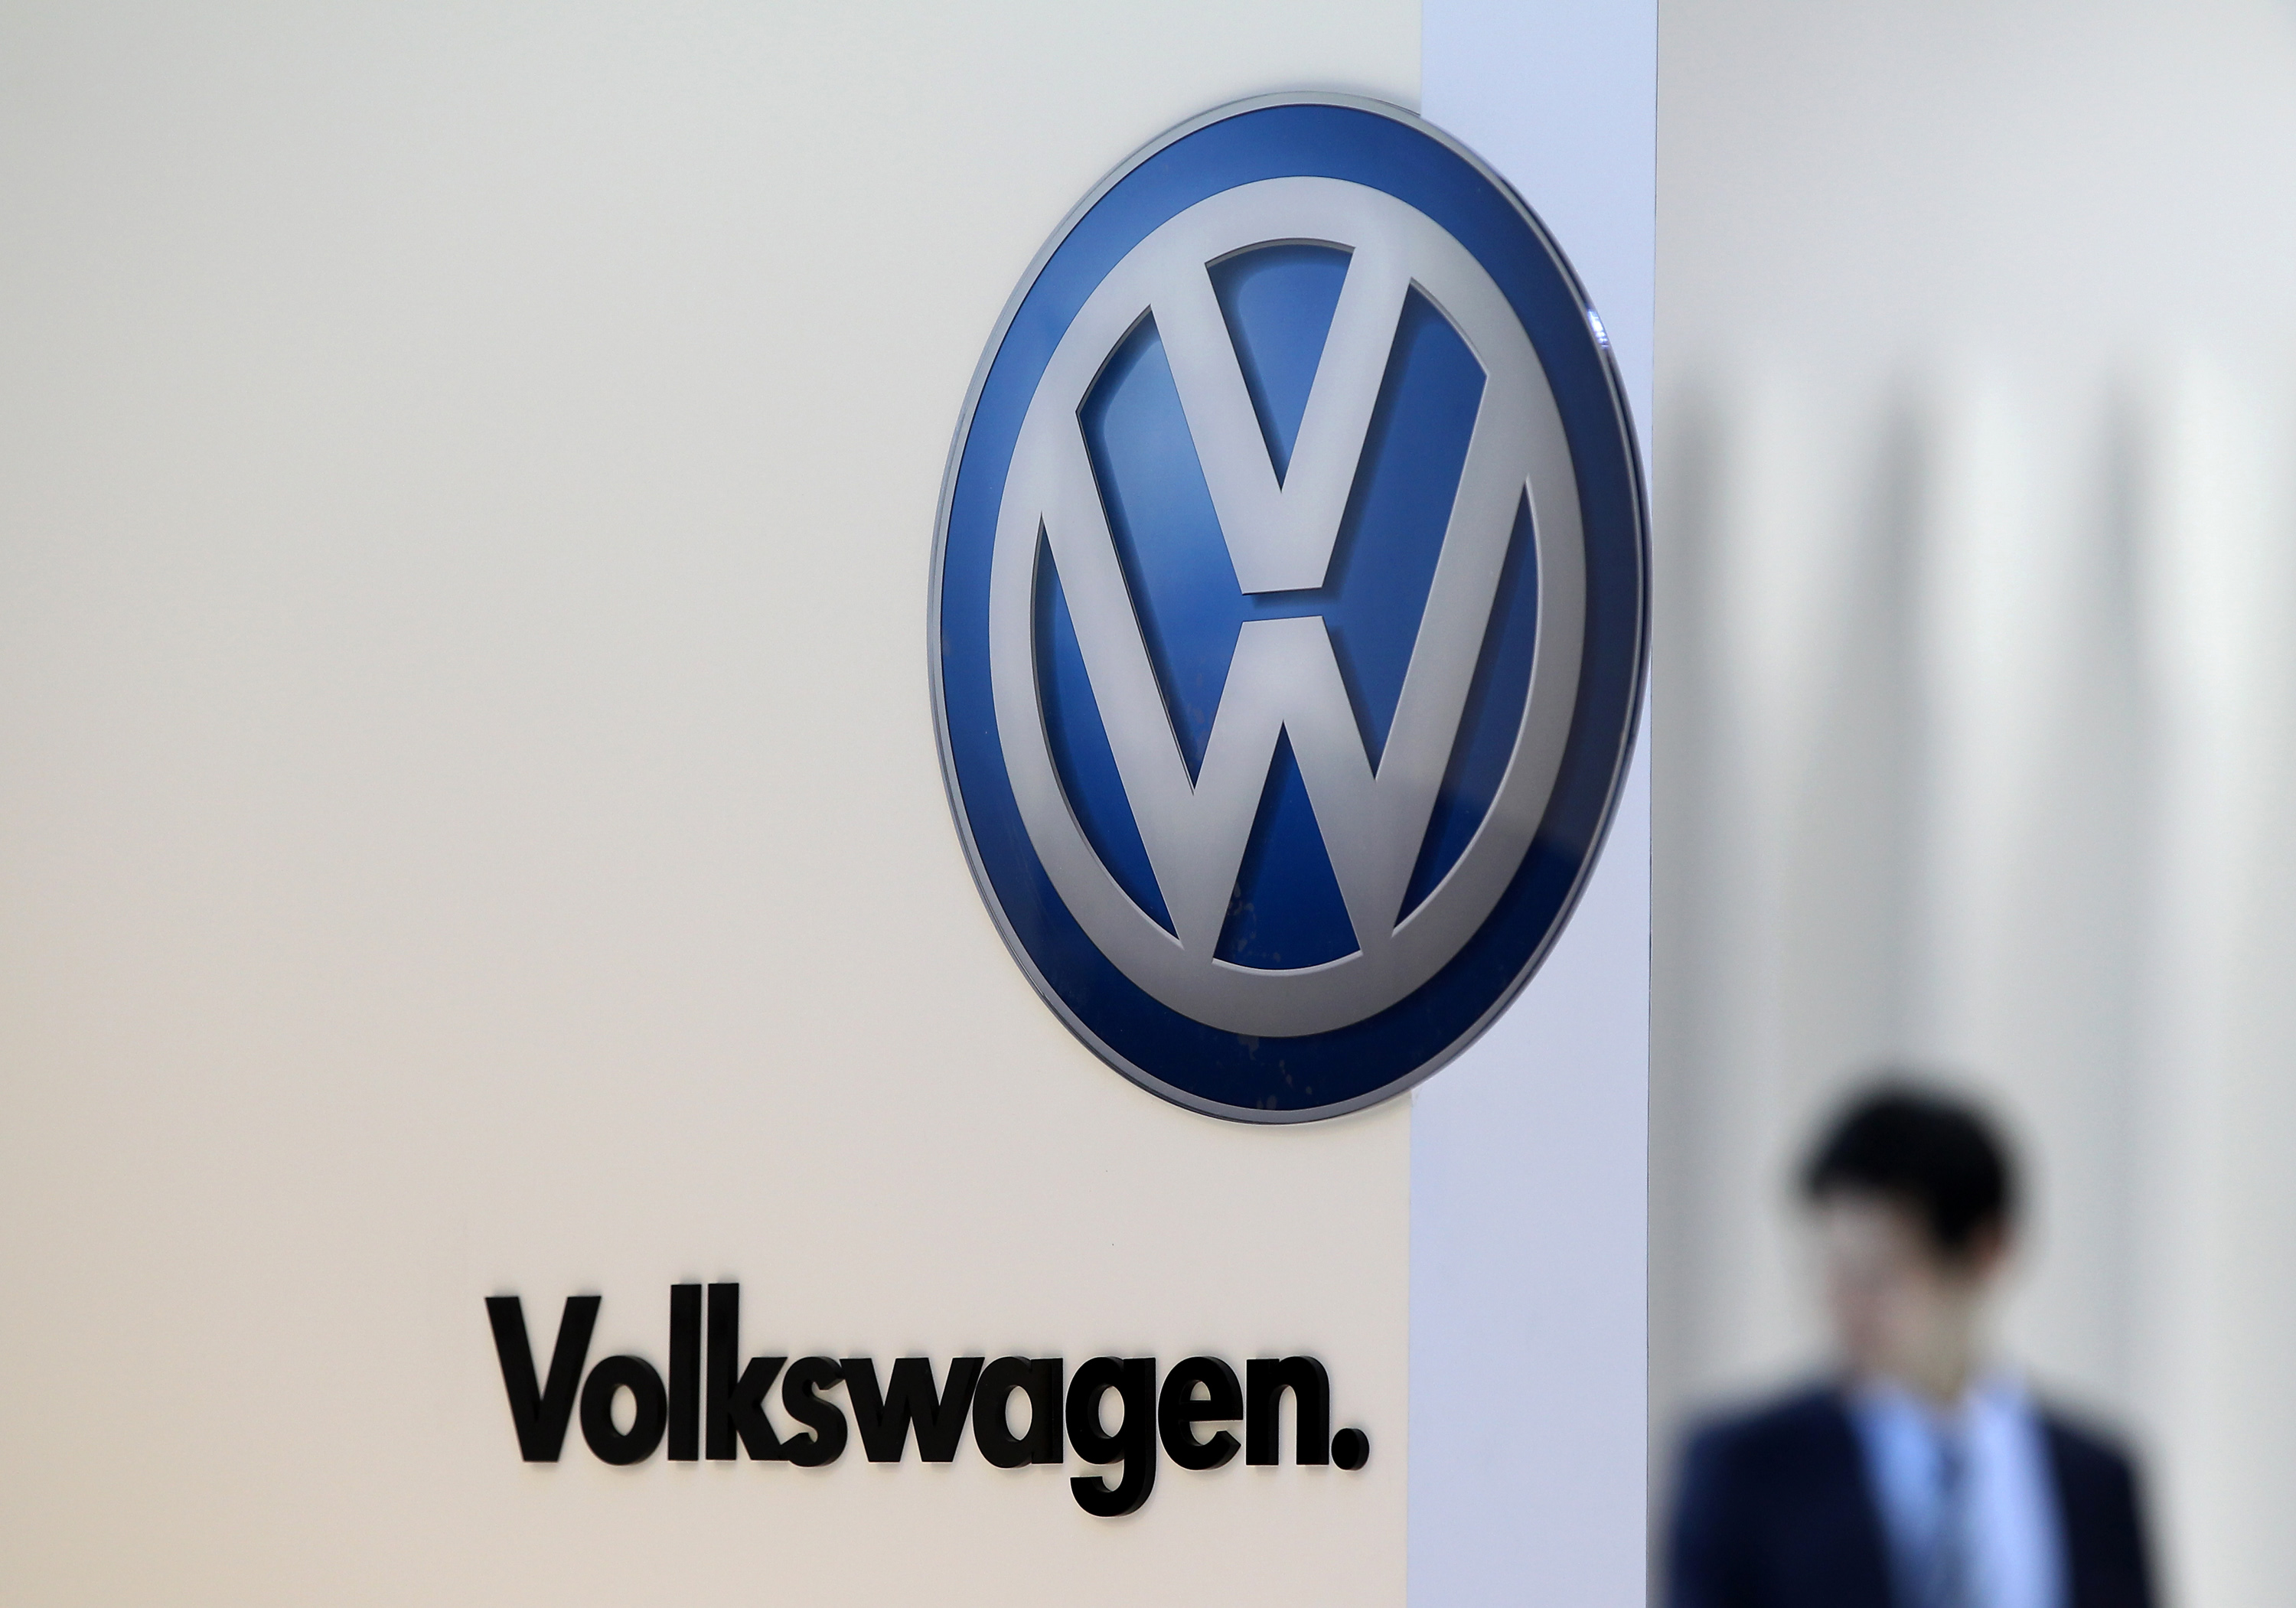 The Volkswagen AG logo is displayed at the company's booth during the media preview of the 2012 Busan International Motor Show in Busan, South Korea, on May 24, 2012. (SeongJoon Cho—Bloomberg/Getty Images)